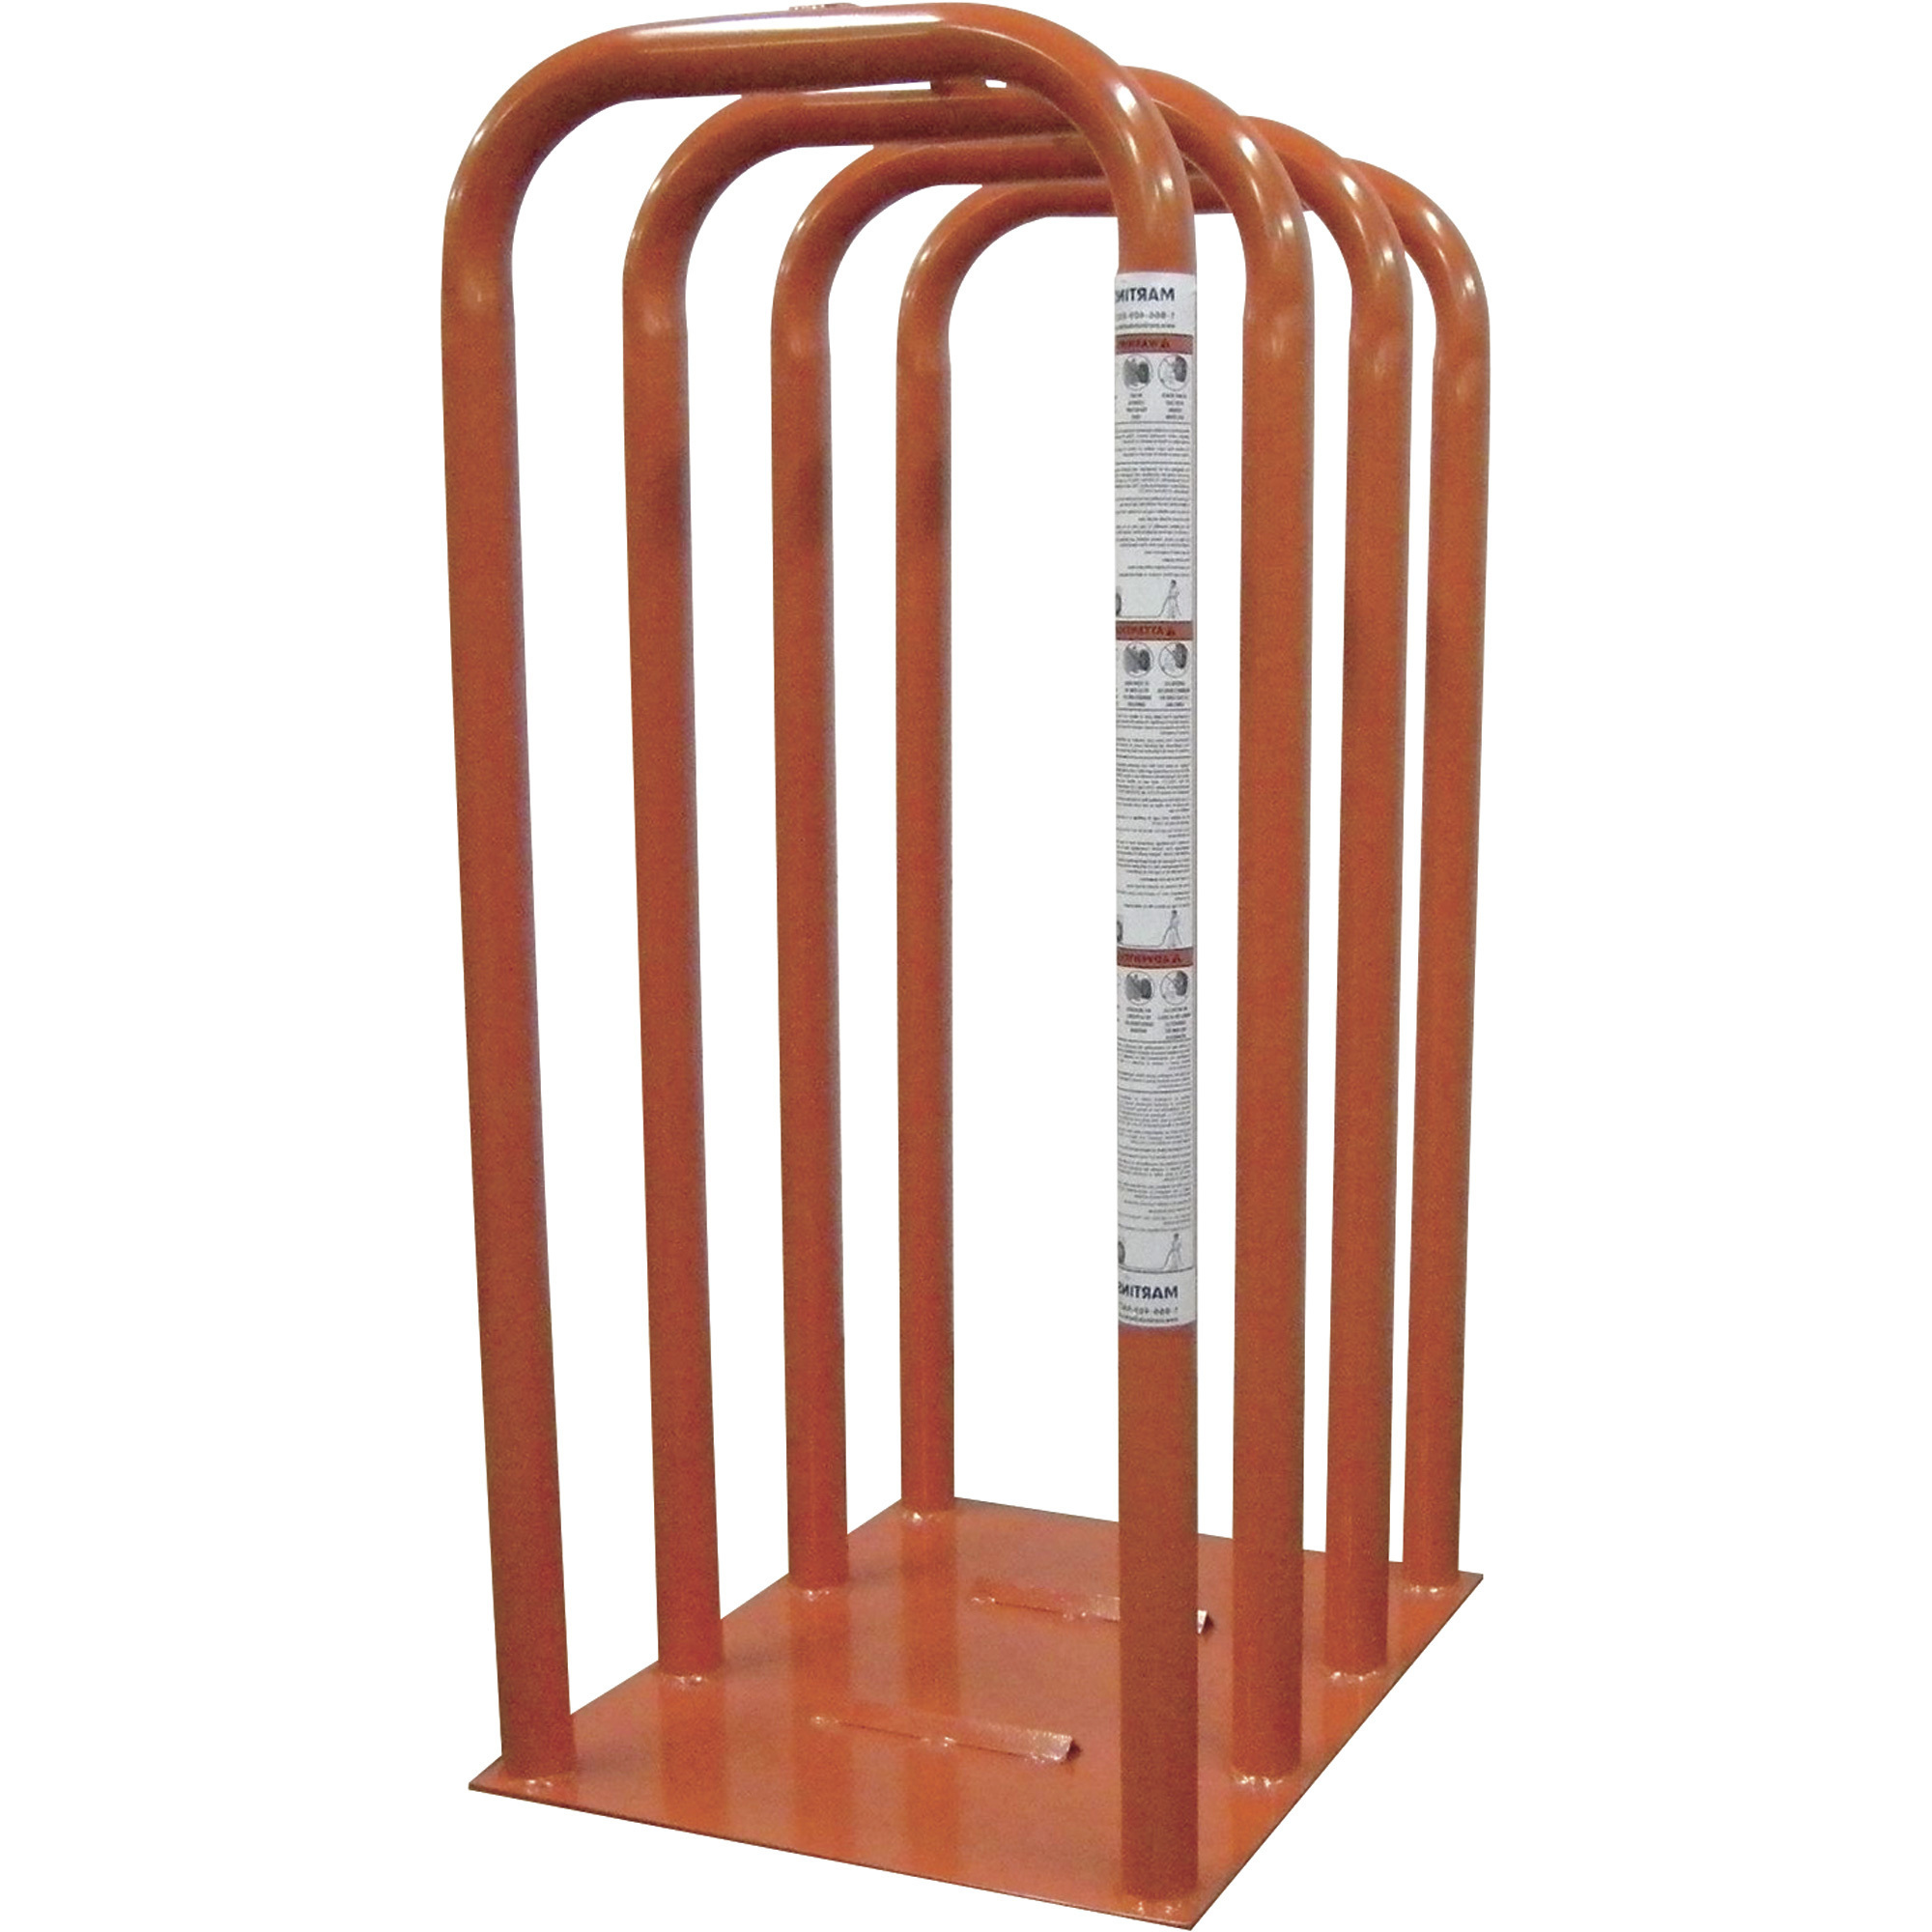 Ame International 4-Bar Tire Inflation Cage â Model 24440